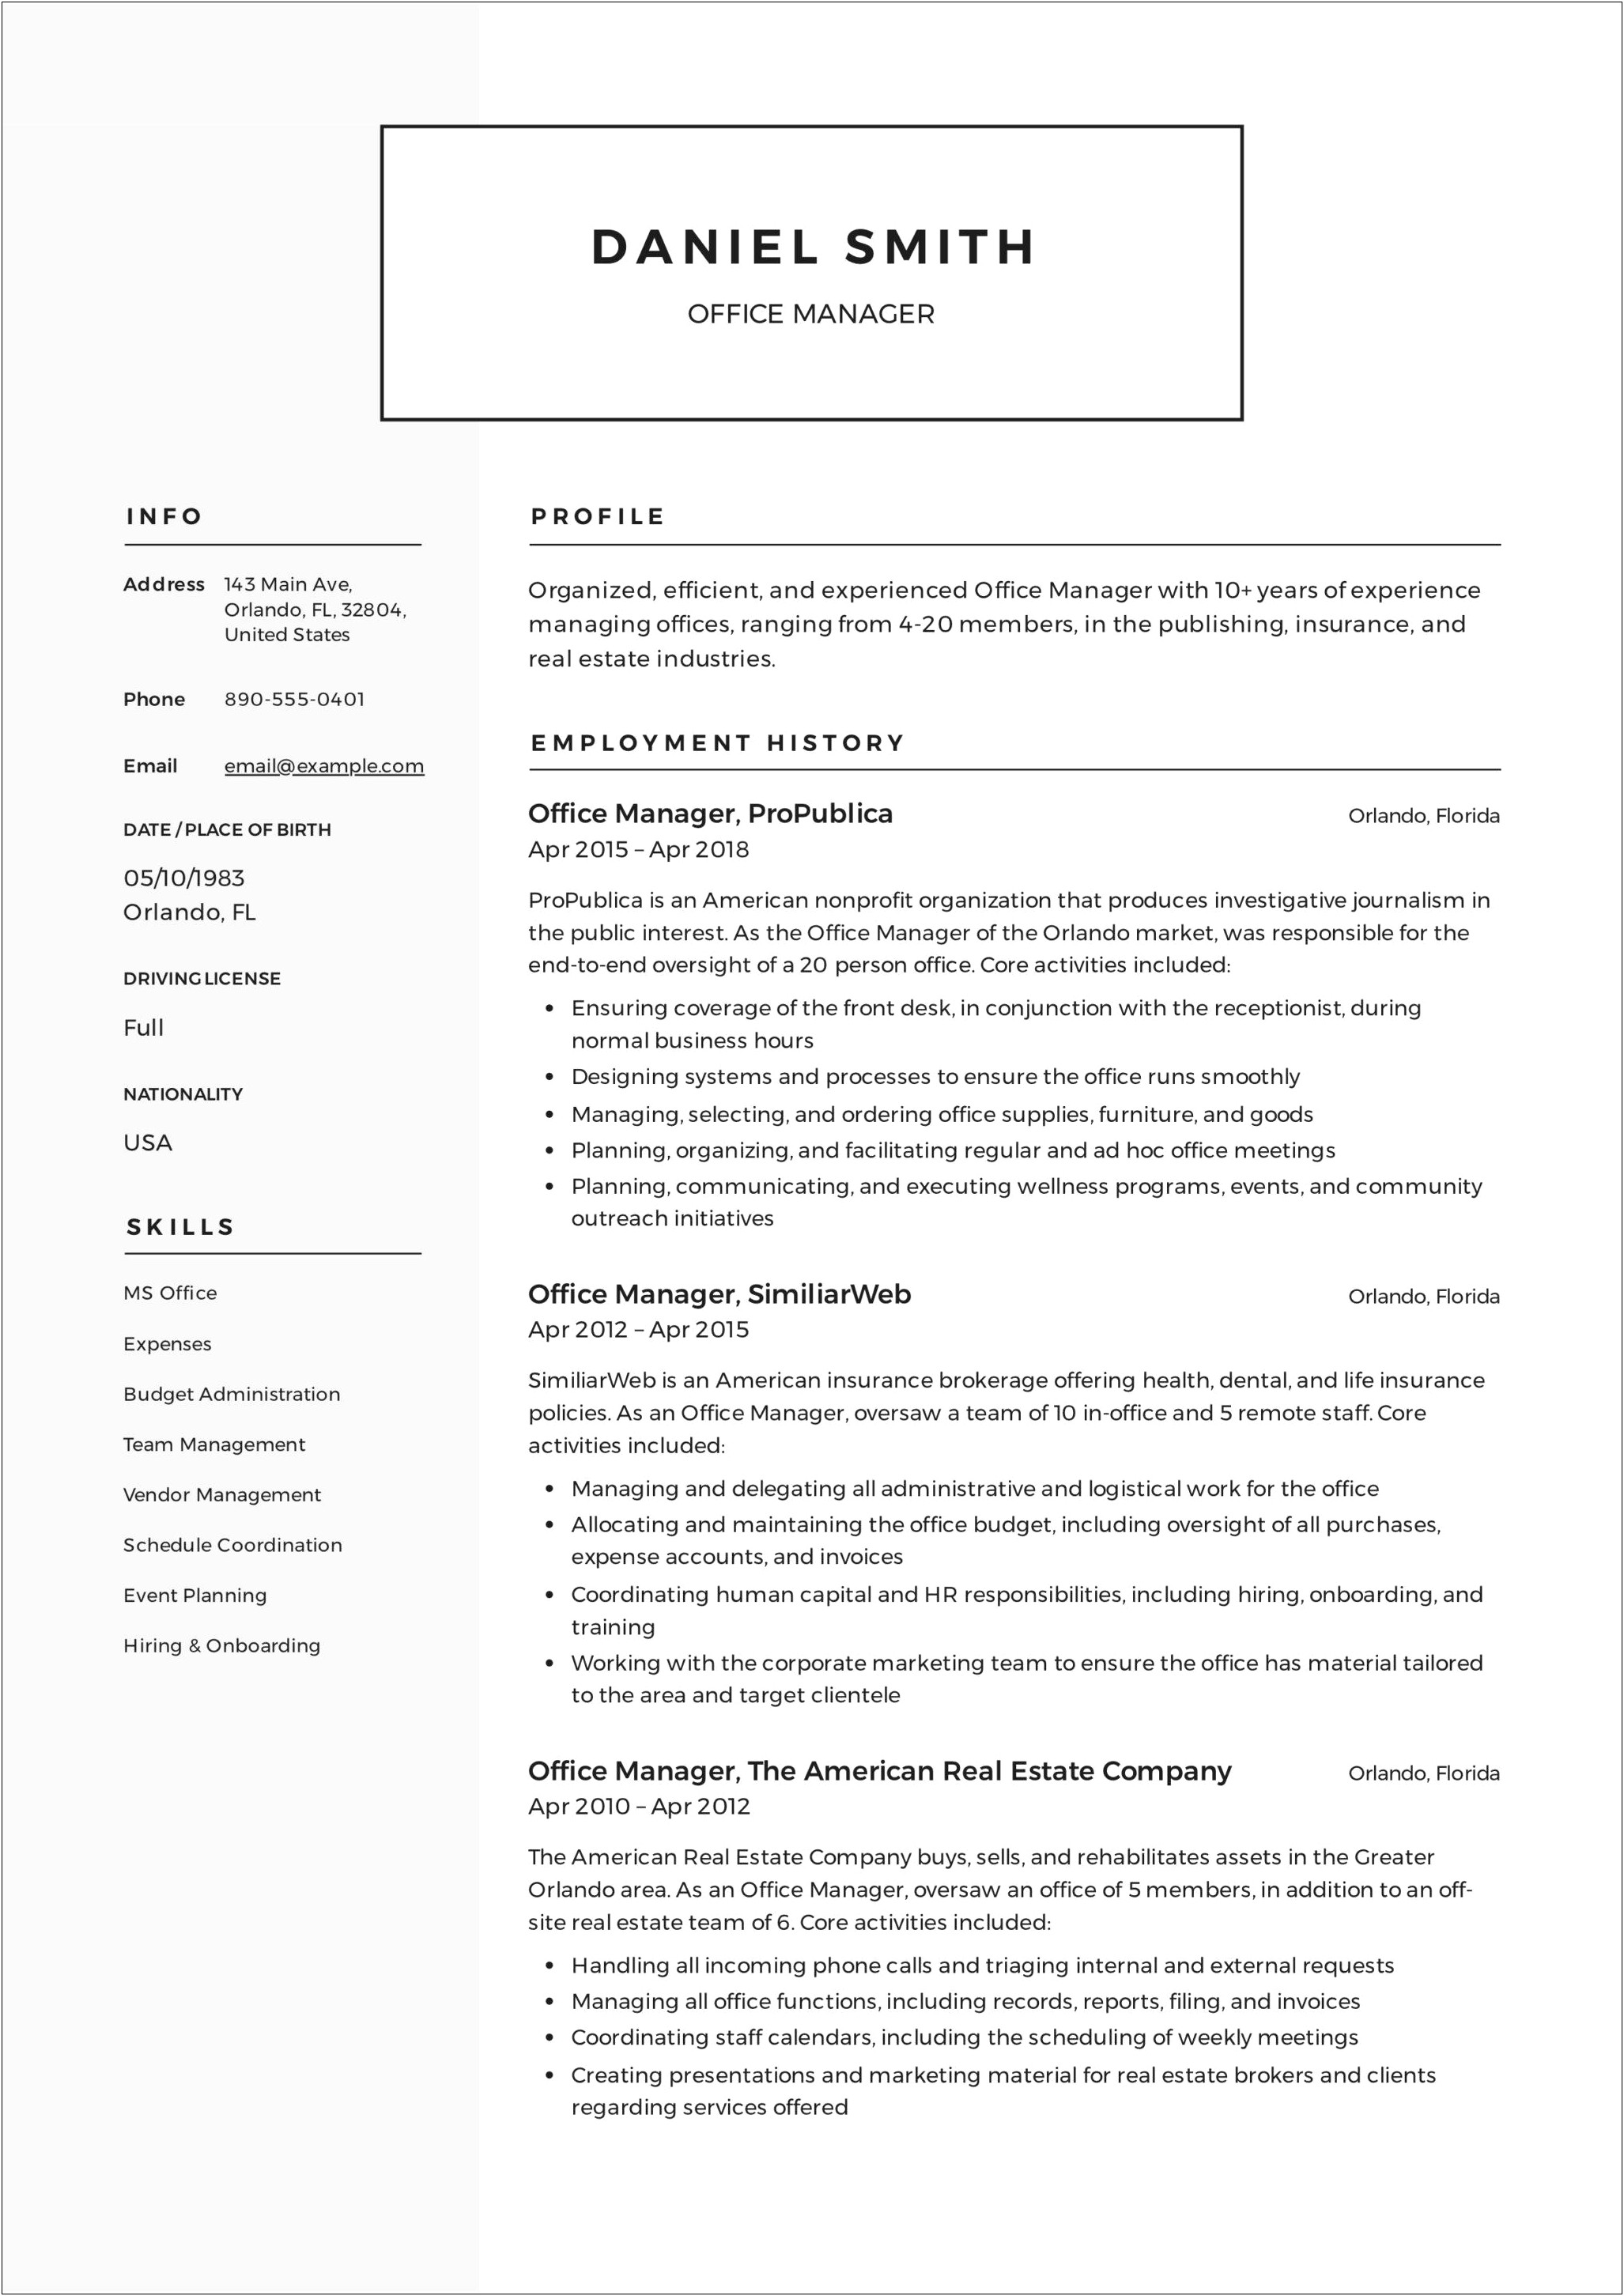 Sample Resume Office Manager Law Firm